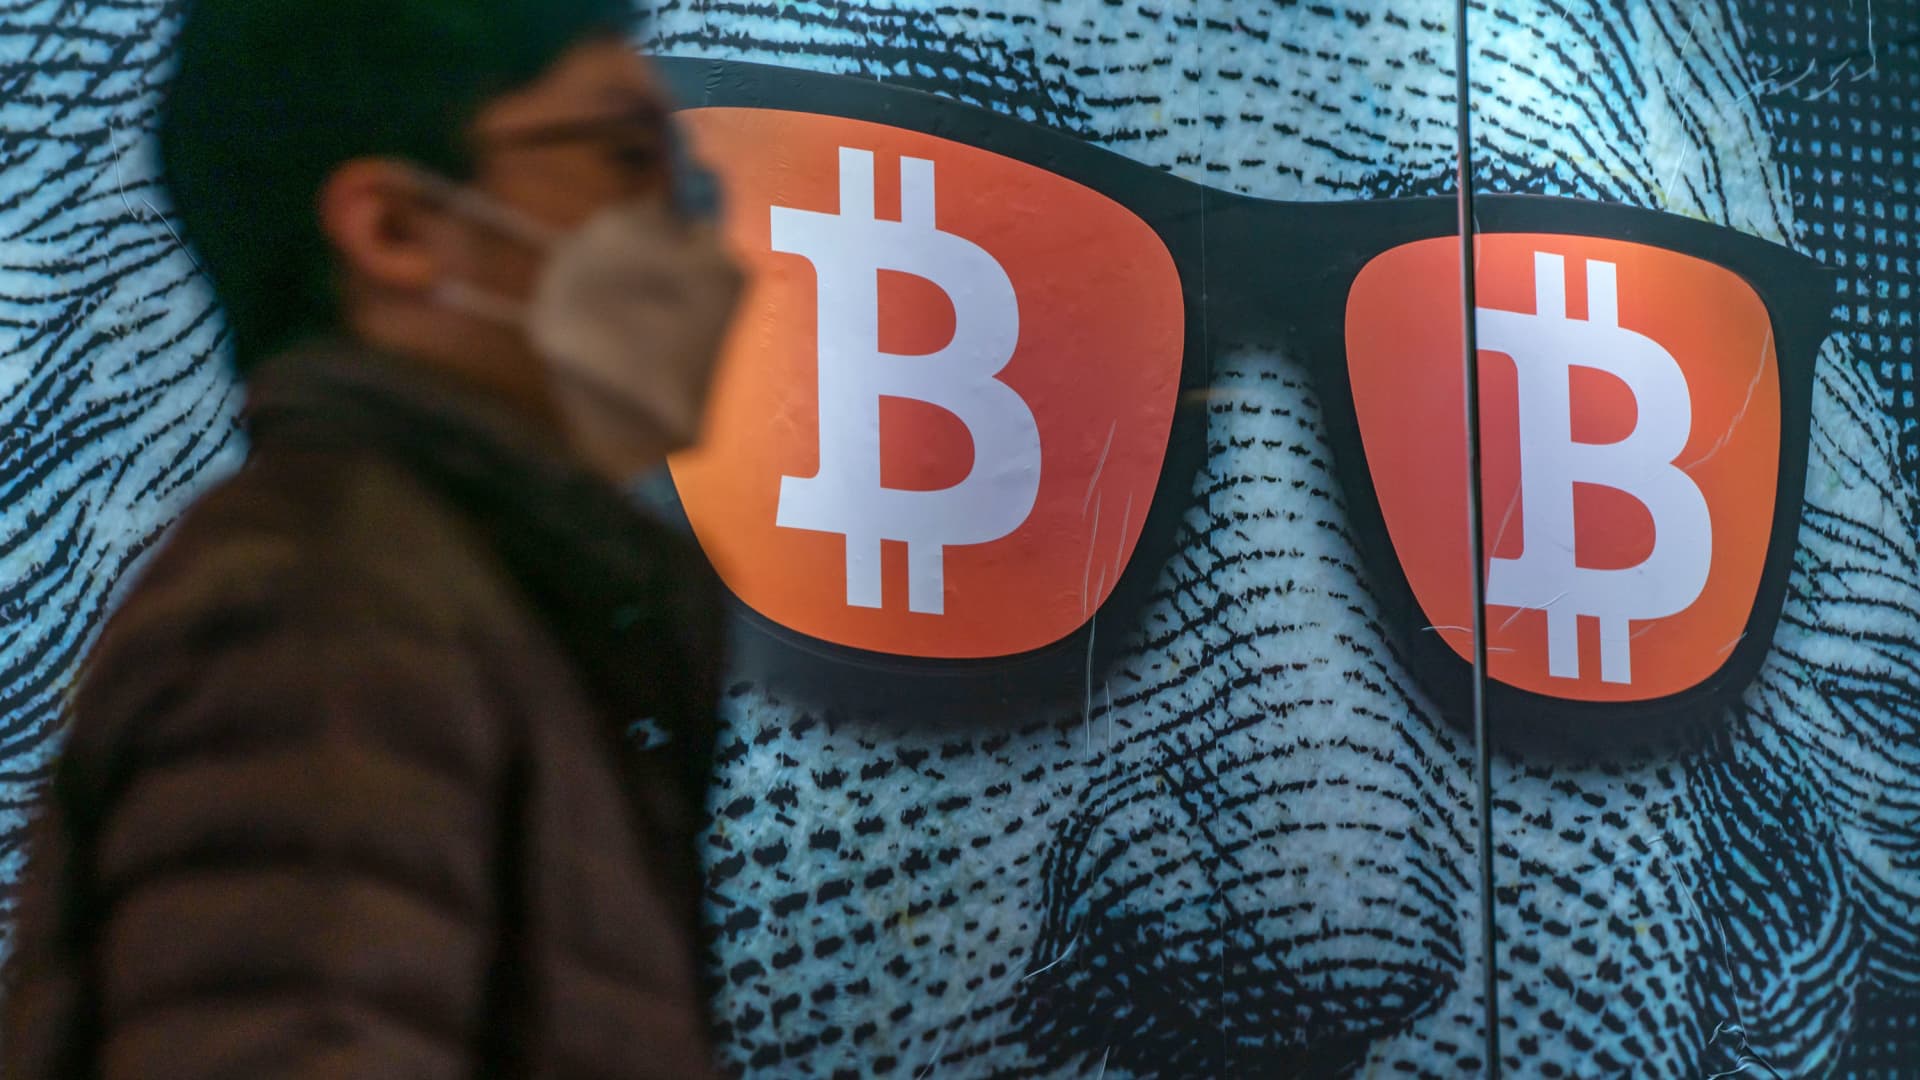 A $3.5 billion bet on bitcoin becoming a 'reserve currency' for crypto is being put to the test